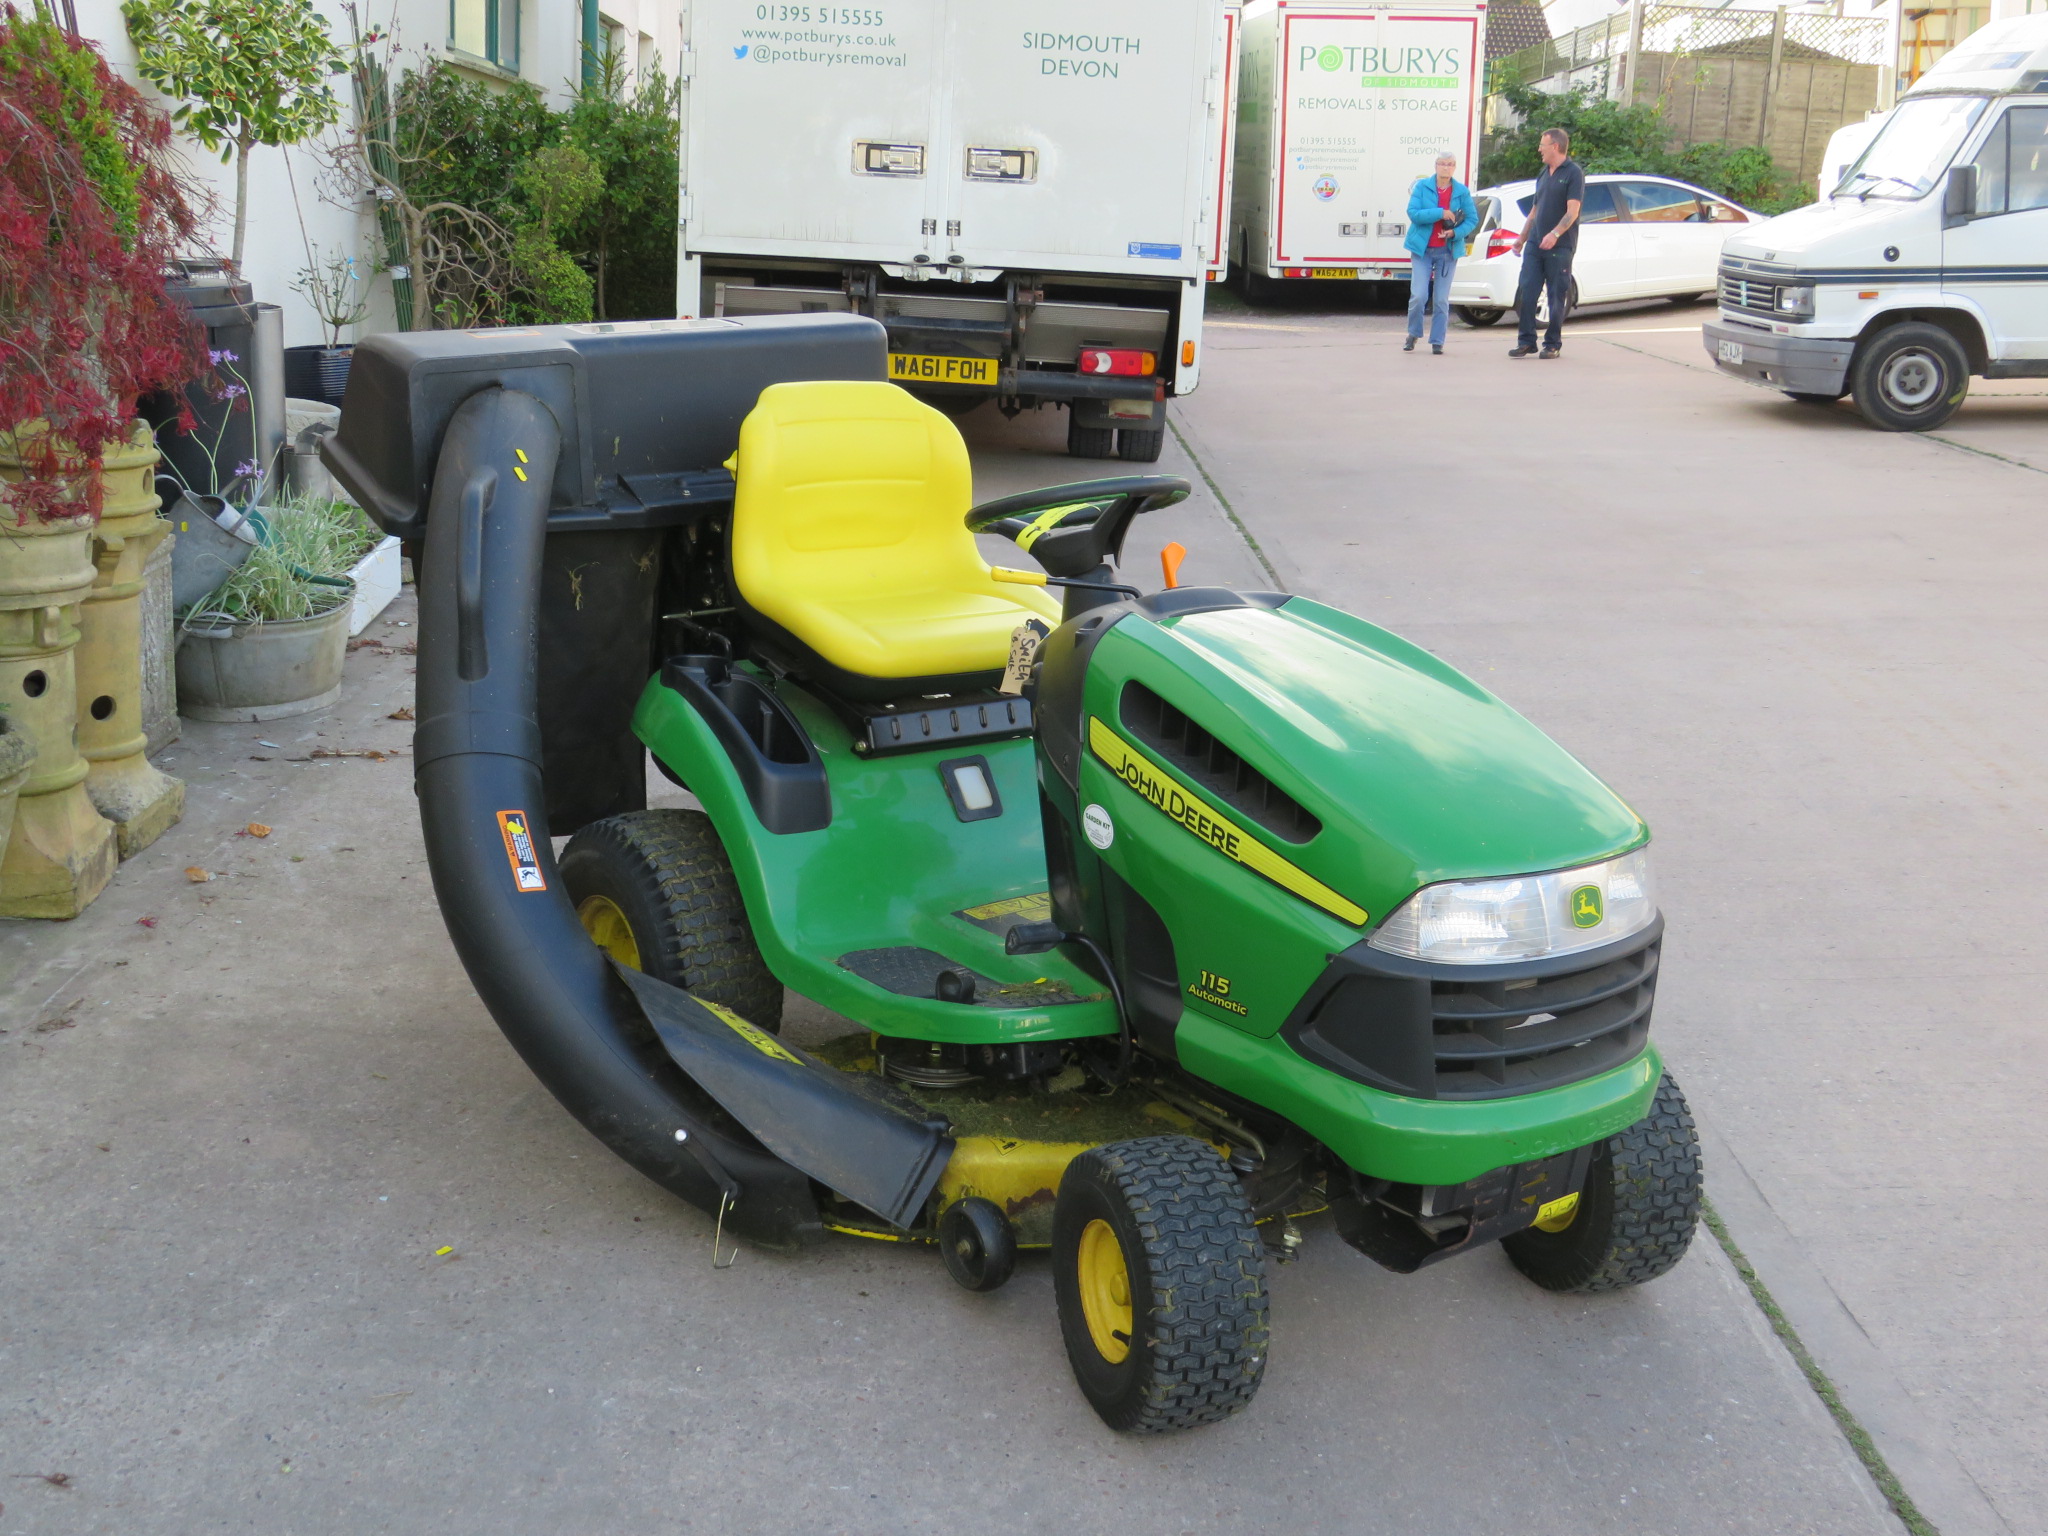 JOHN DEERE 115 AUTOMATIC RIDE ON LAWNMOWER WITH COLLECTION TUBE AND BAGS (INSIDE AUCTION ROOMS ON - Image 2 of 6